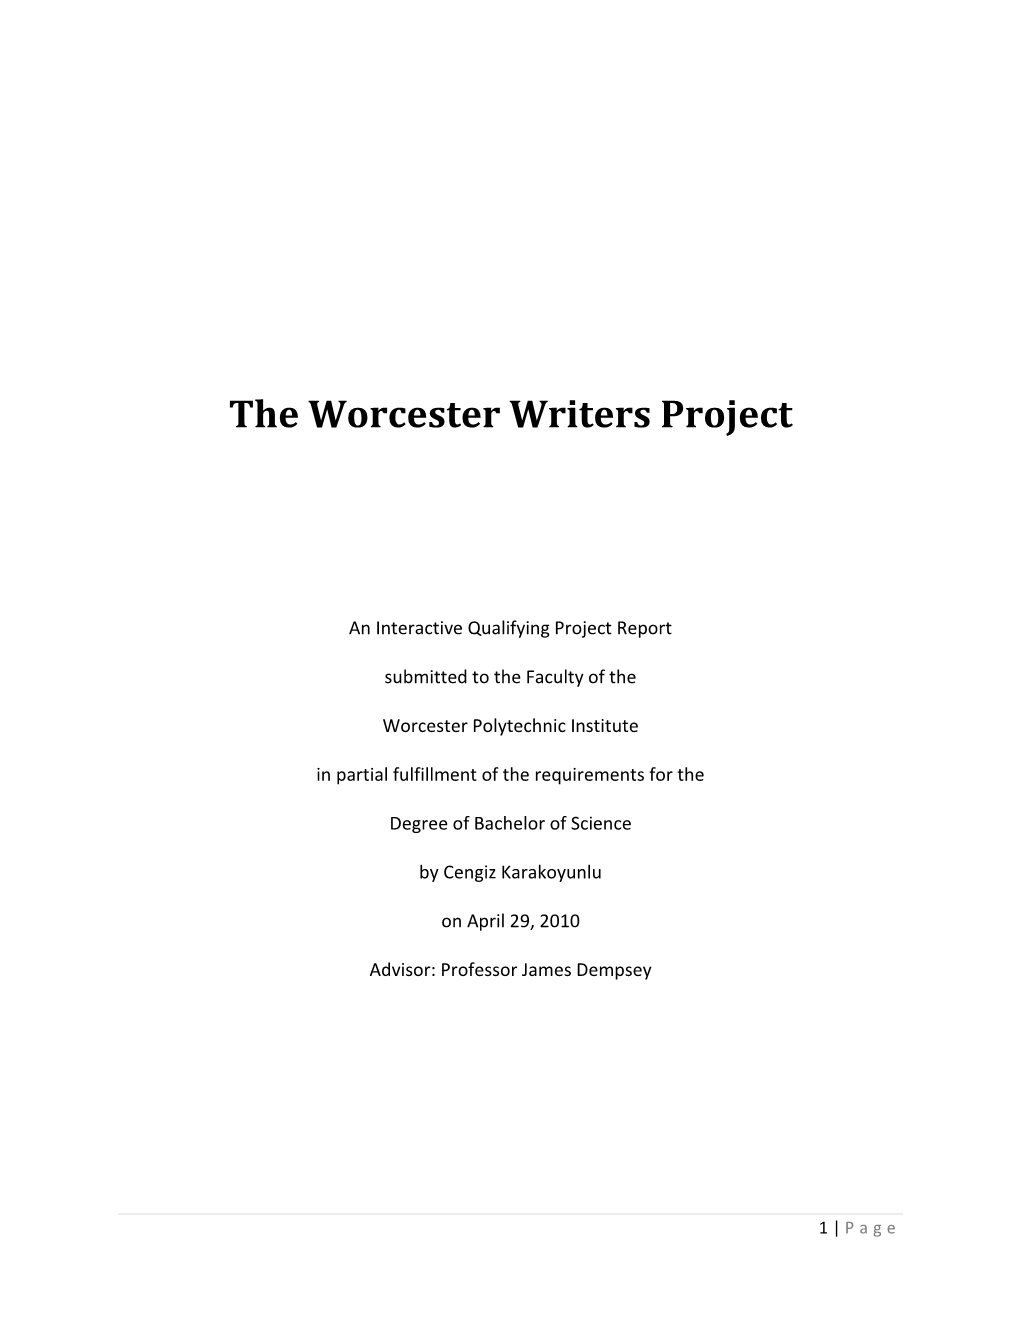 The Worcester Writers Project